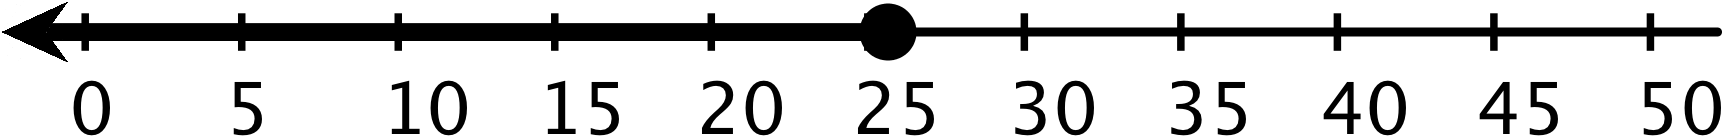 A Number Line With The Numbers 0 Through 50, In Increments - A Number Line With The Numbers 0 Through 50, In Increments (1800x300)